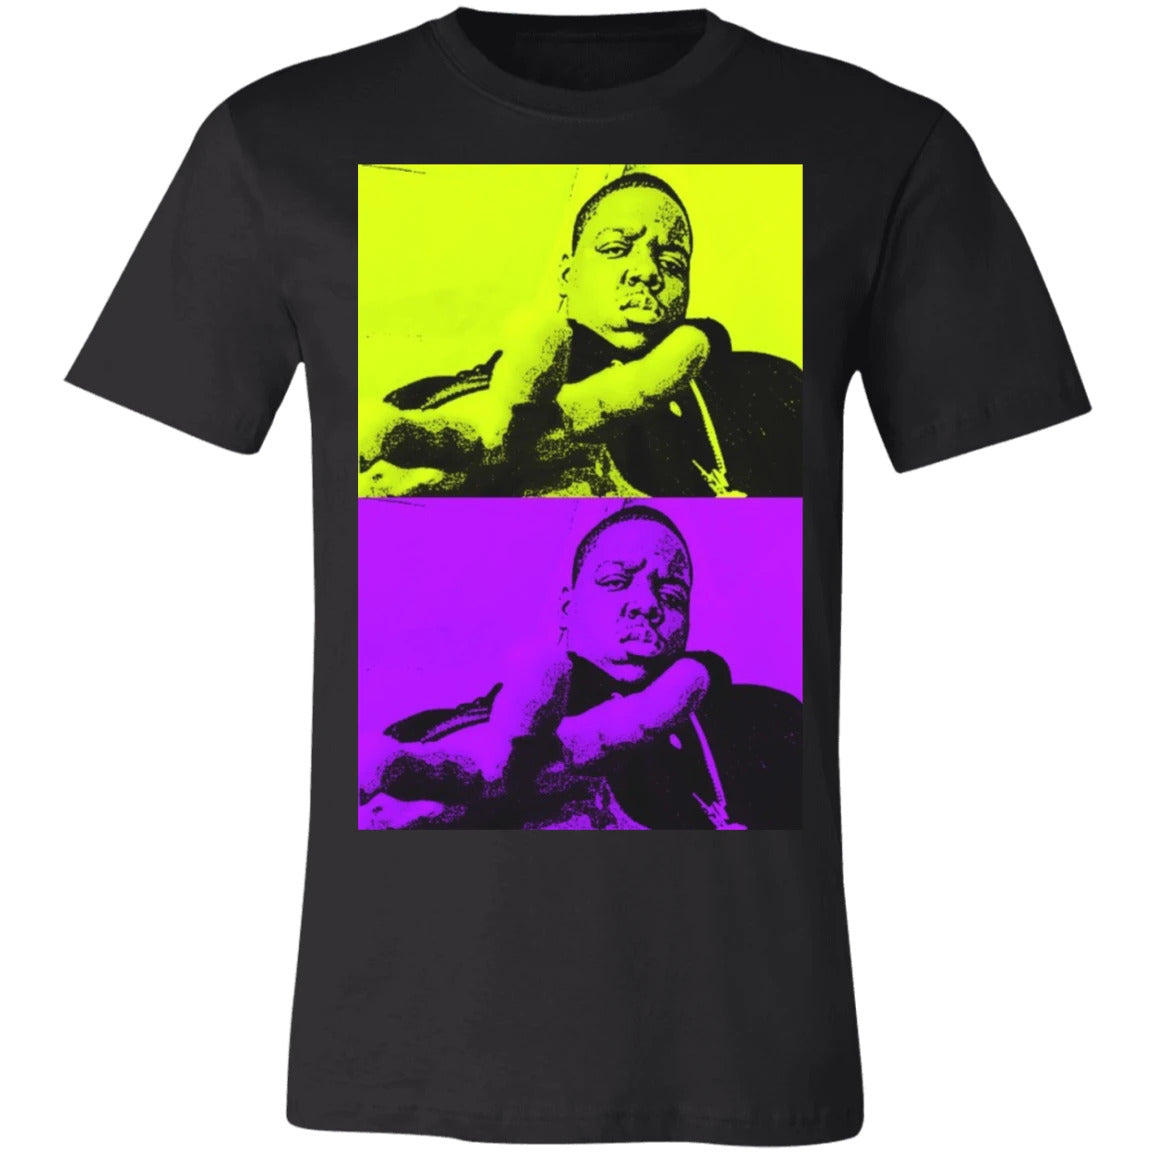 notorious big graphic tee in black, the top of the design is yellow and the bottom is purple